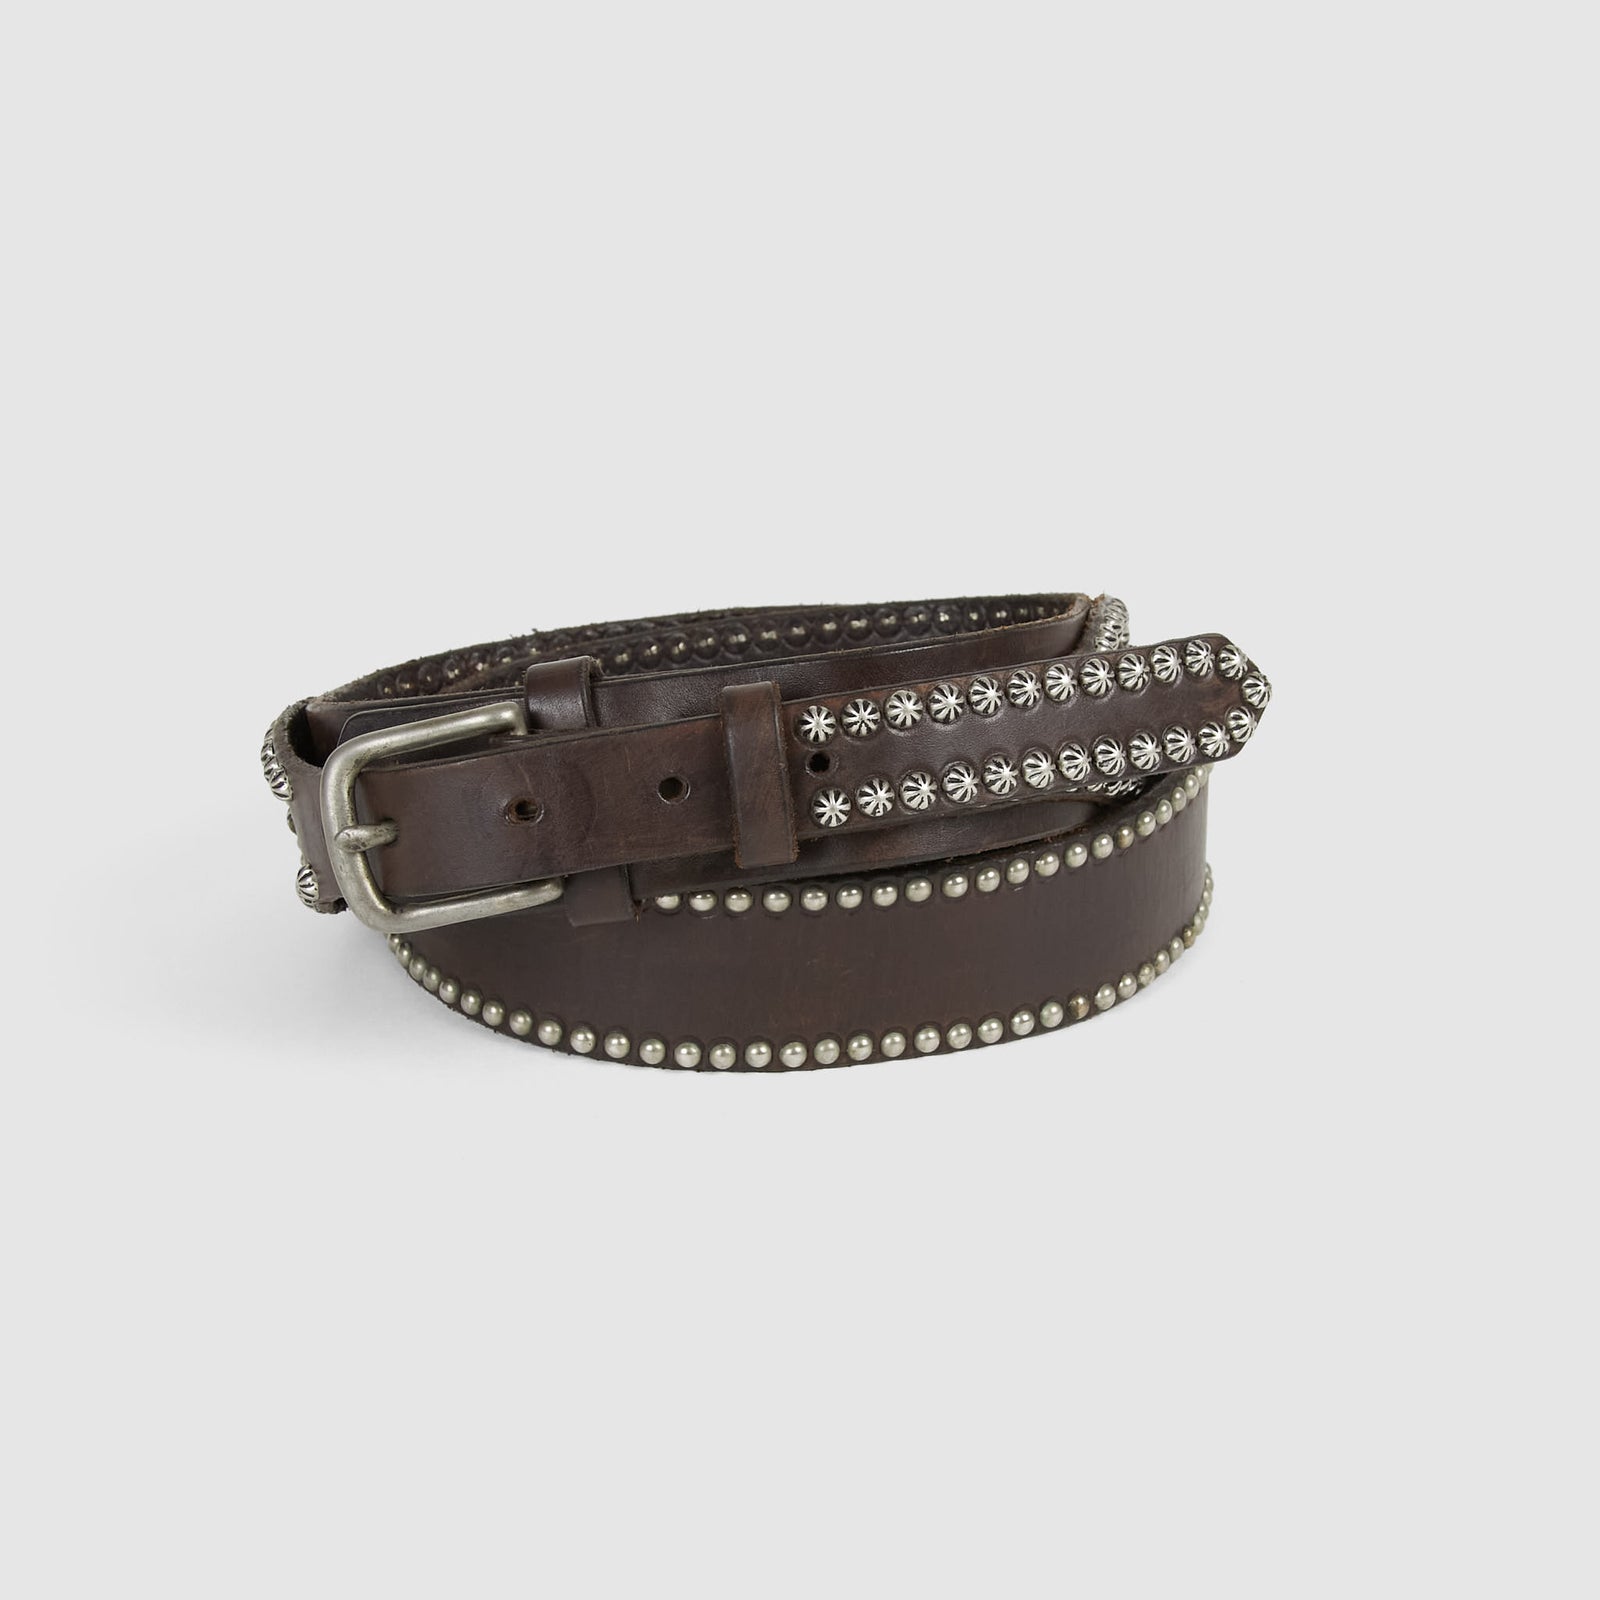 HTC Braided Belt with Studs - DeeCee style